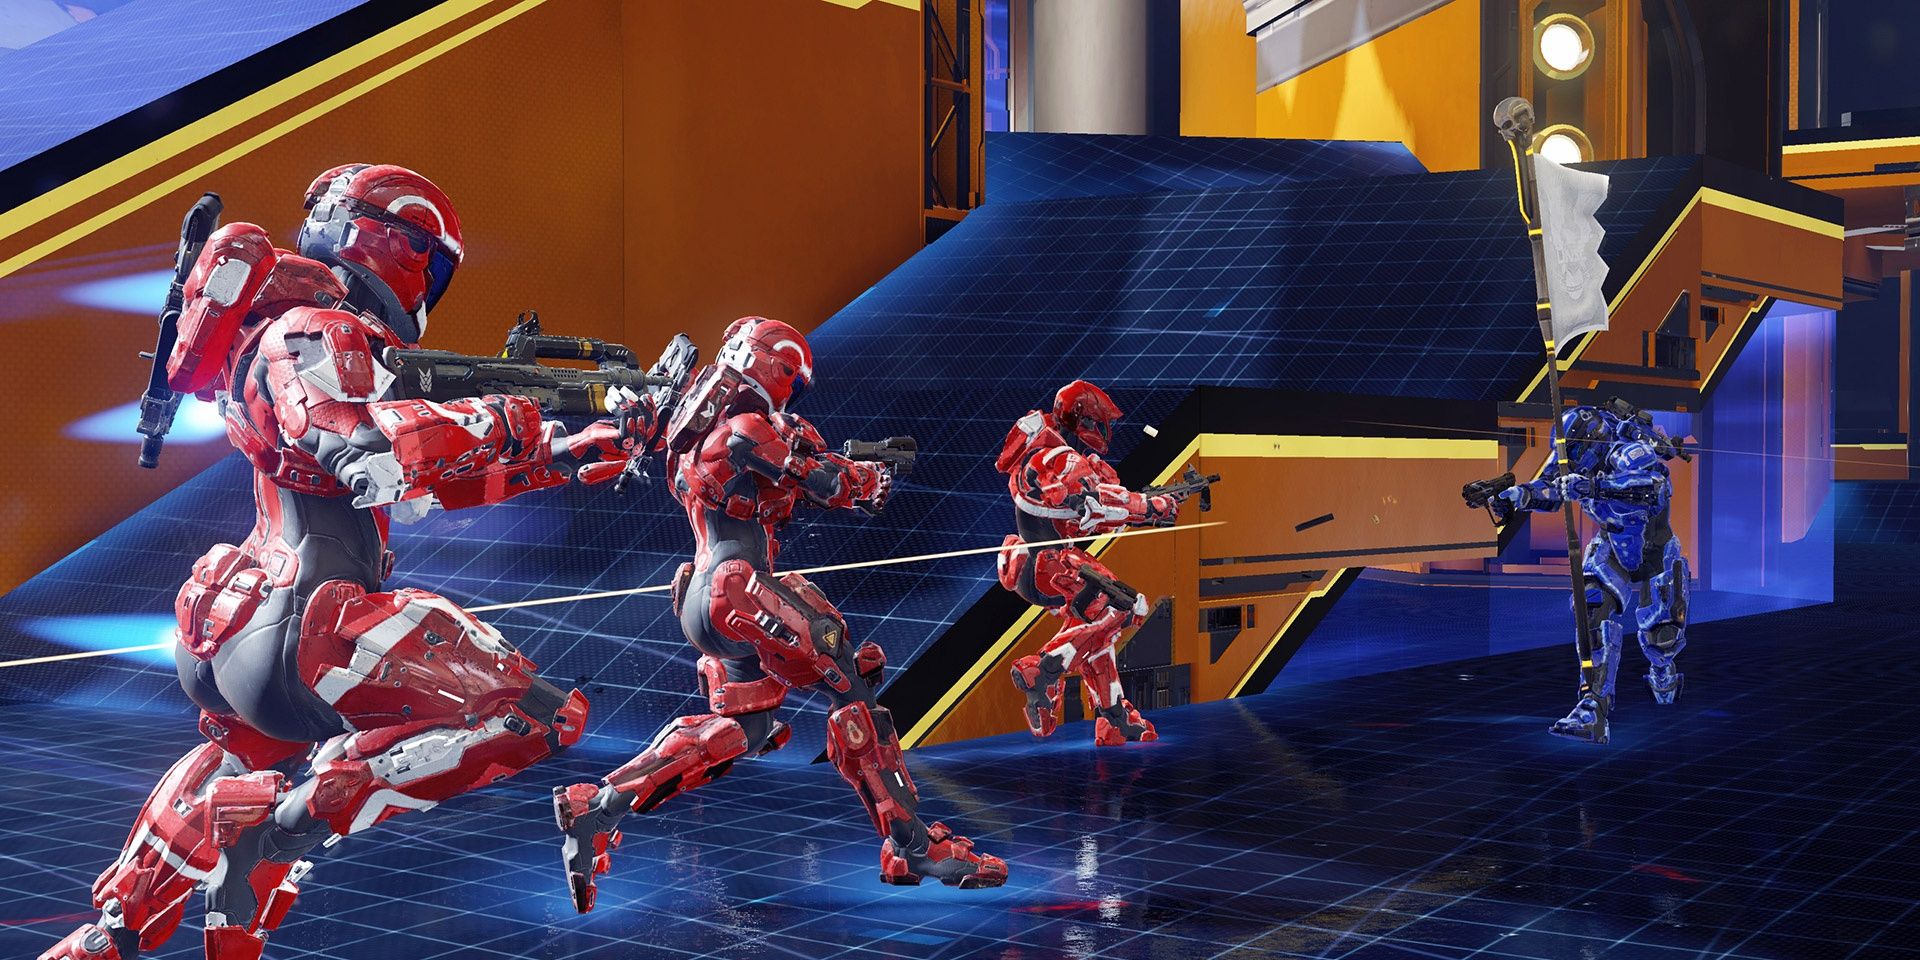 Red Spartans attacking Blue Spartan in Halo 5 Guardians multiplayer